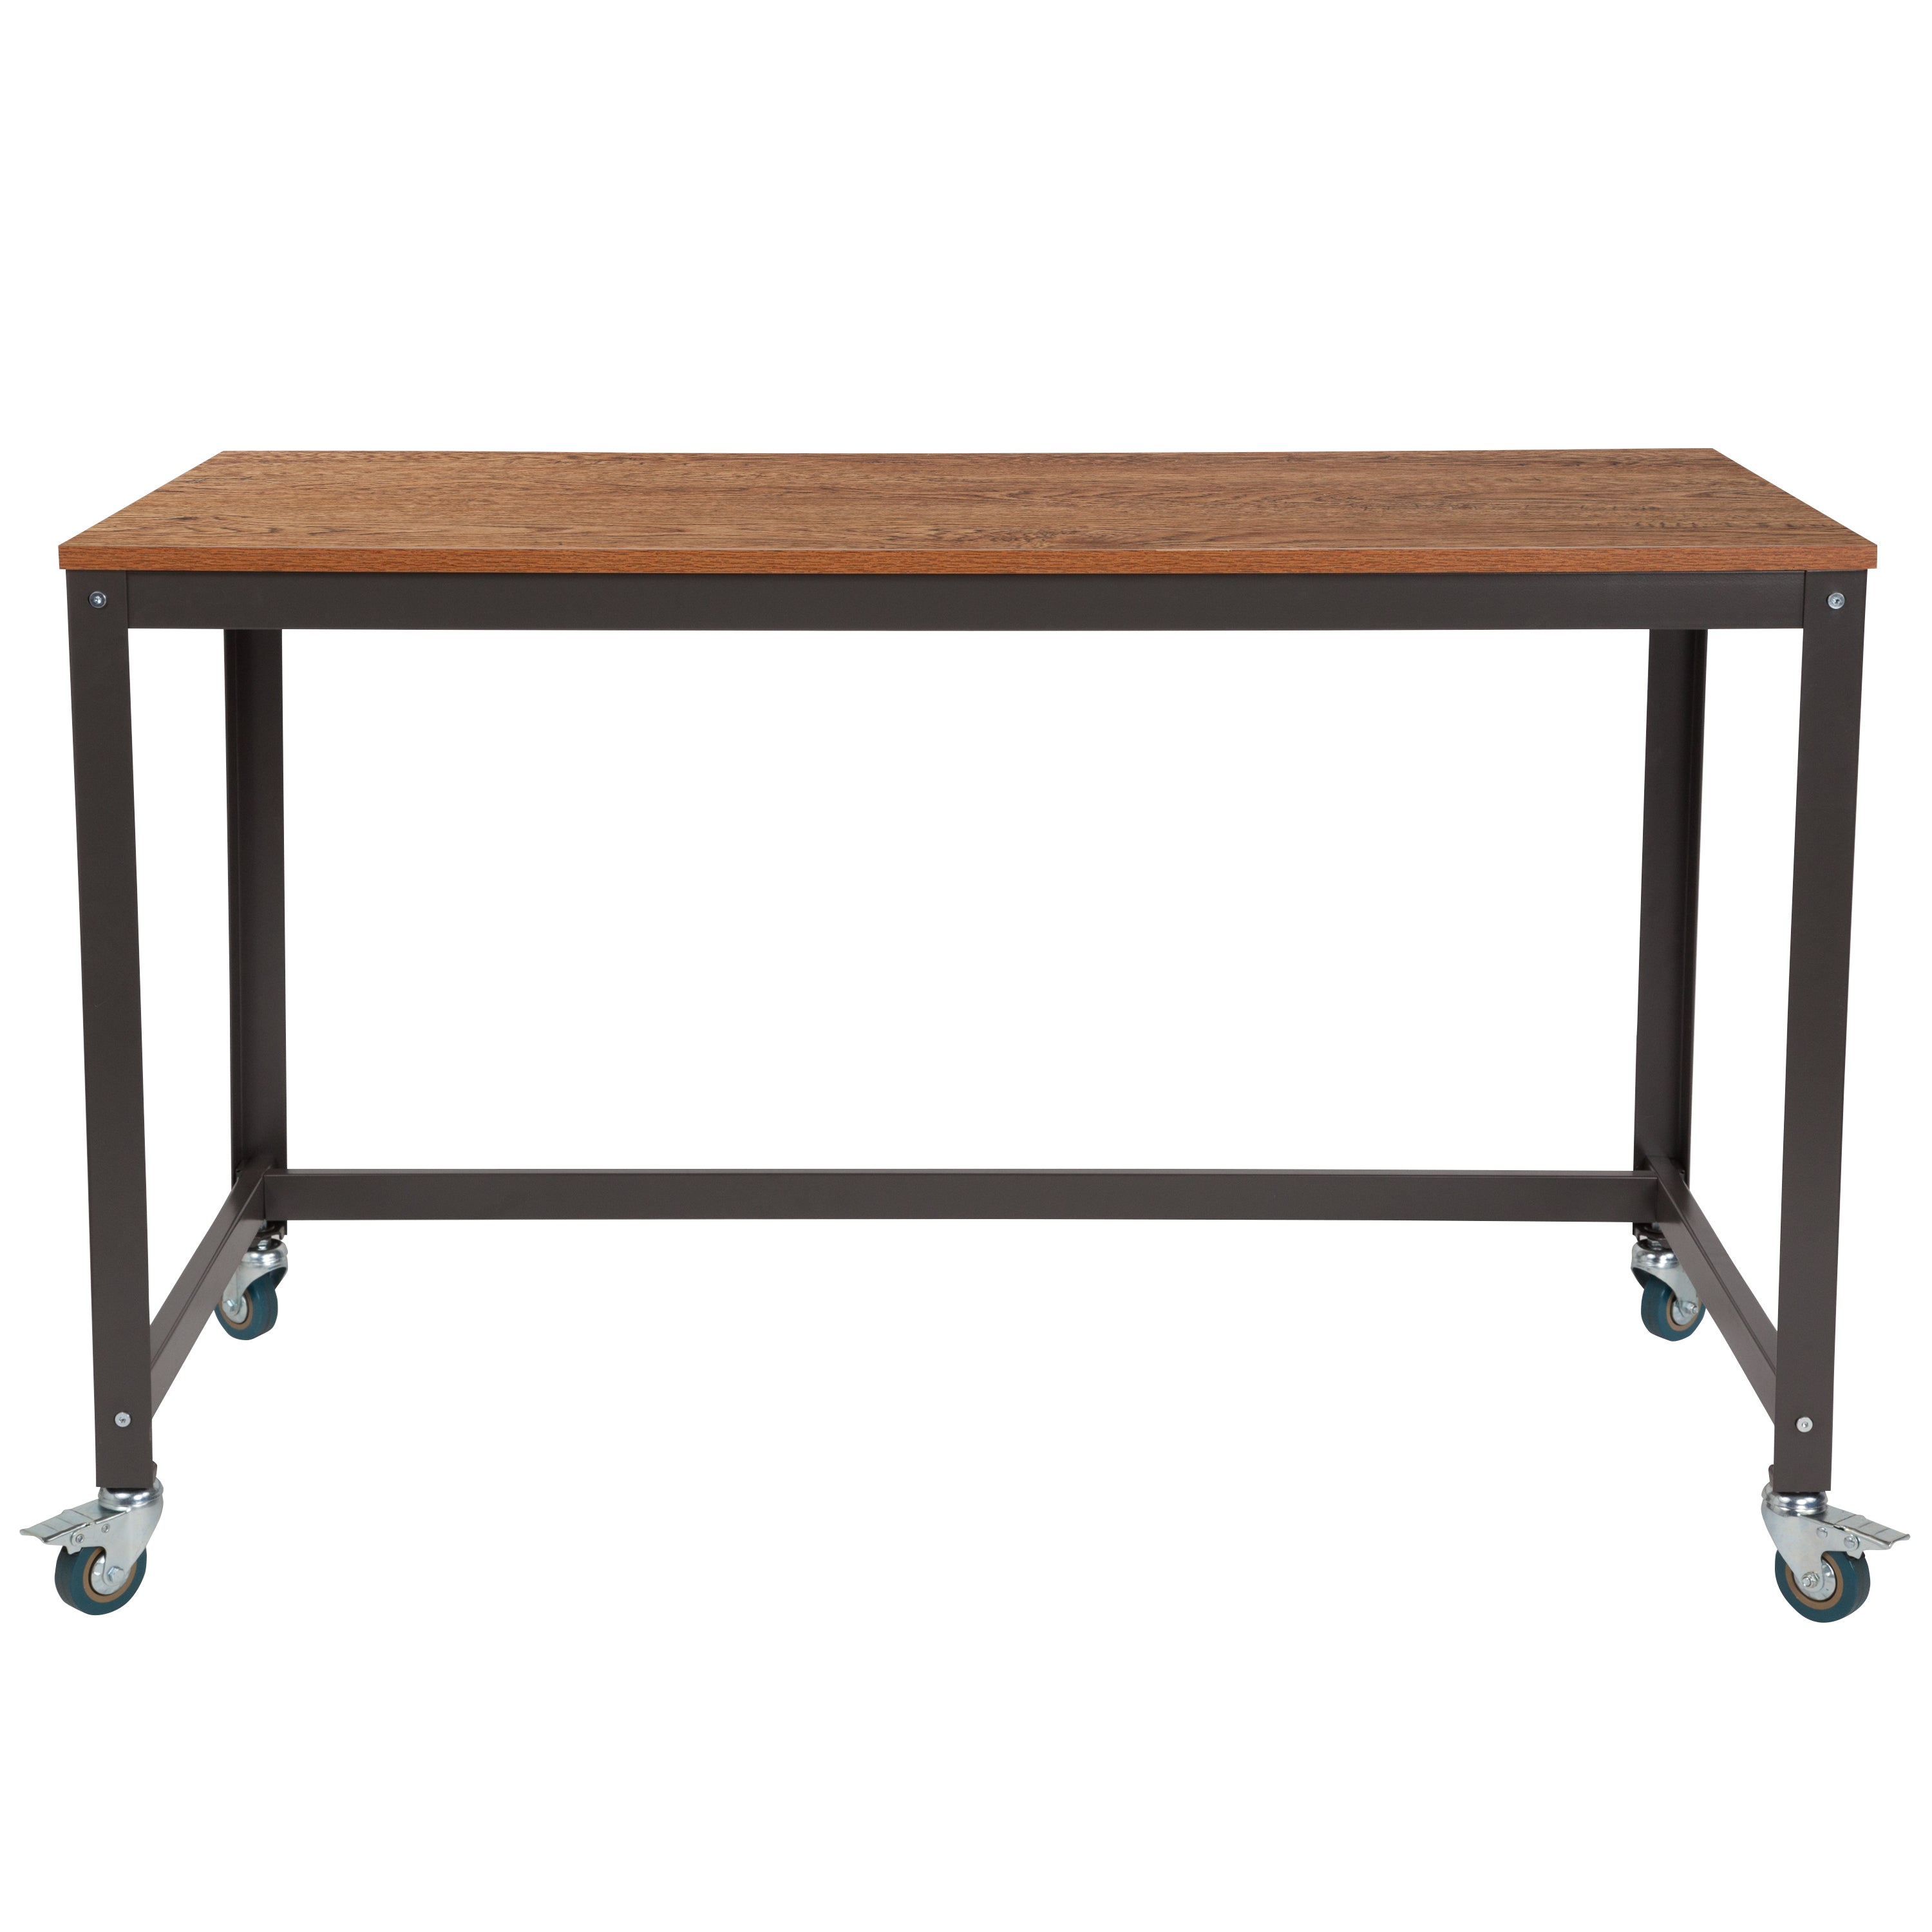 Livingston Collection Computer Table and Desk in Wood Grain Finish with Metal Wheels-Desk-Flash Furniture-Wall2Wall Furnishings